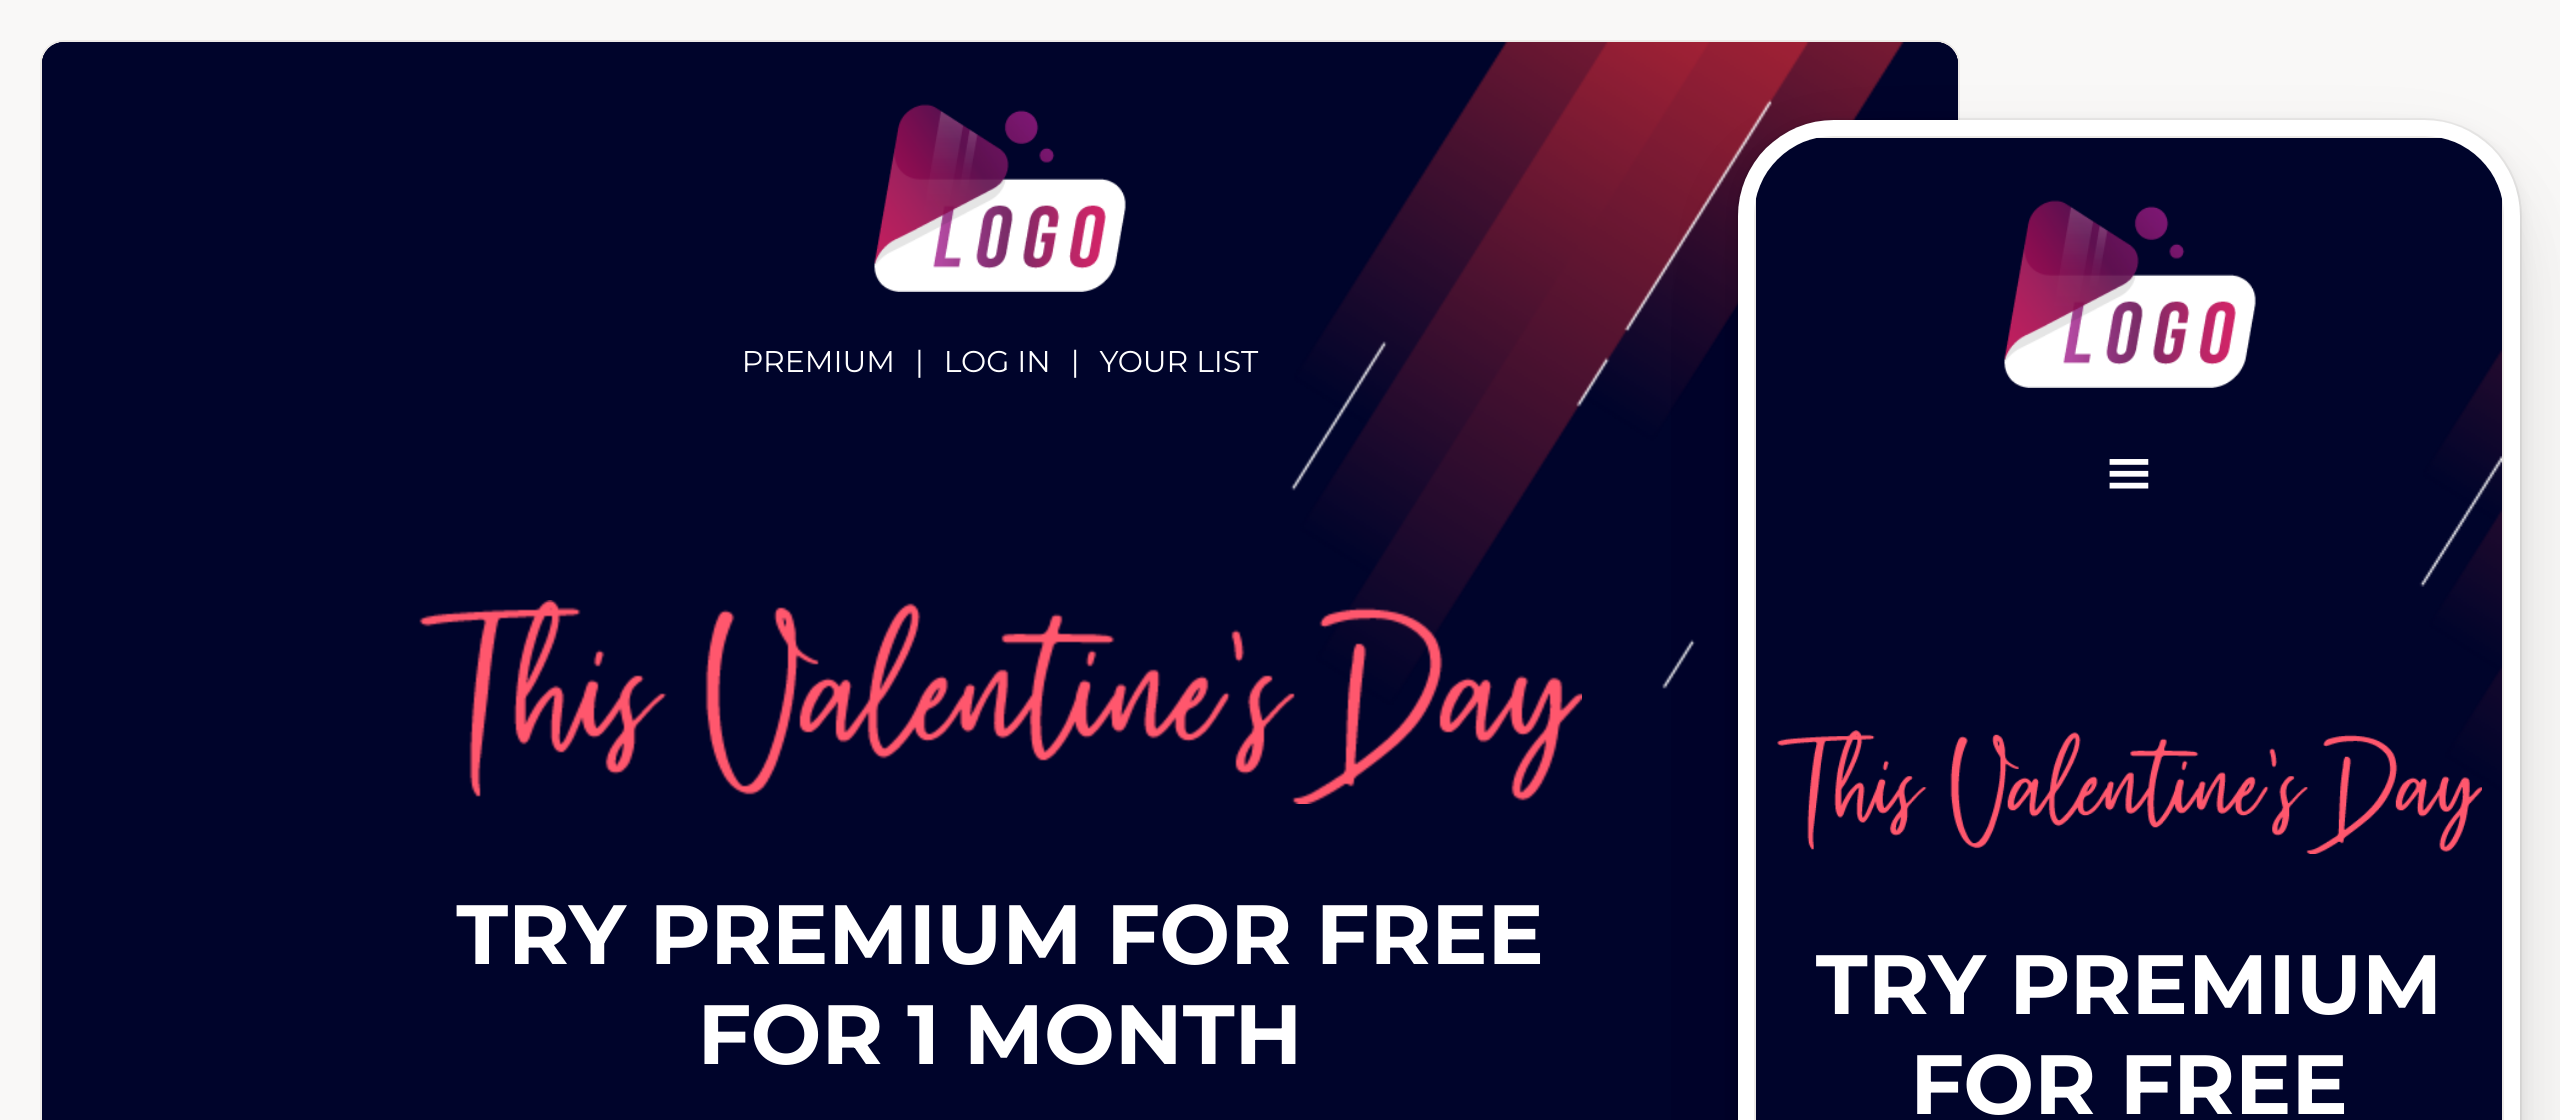 Valentine's subscription offer